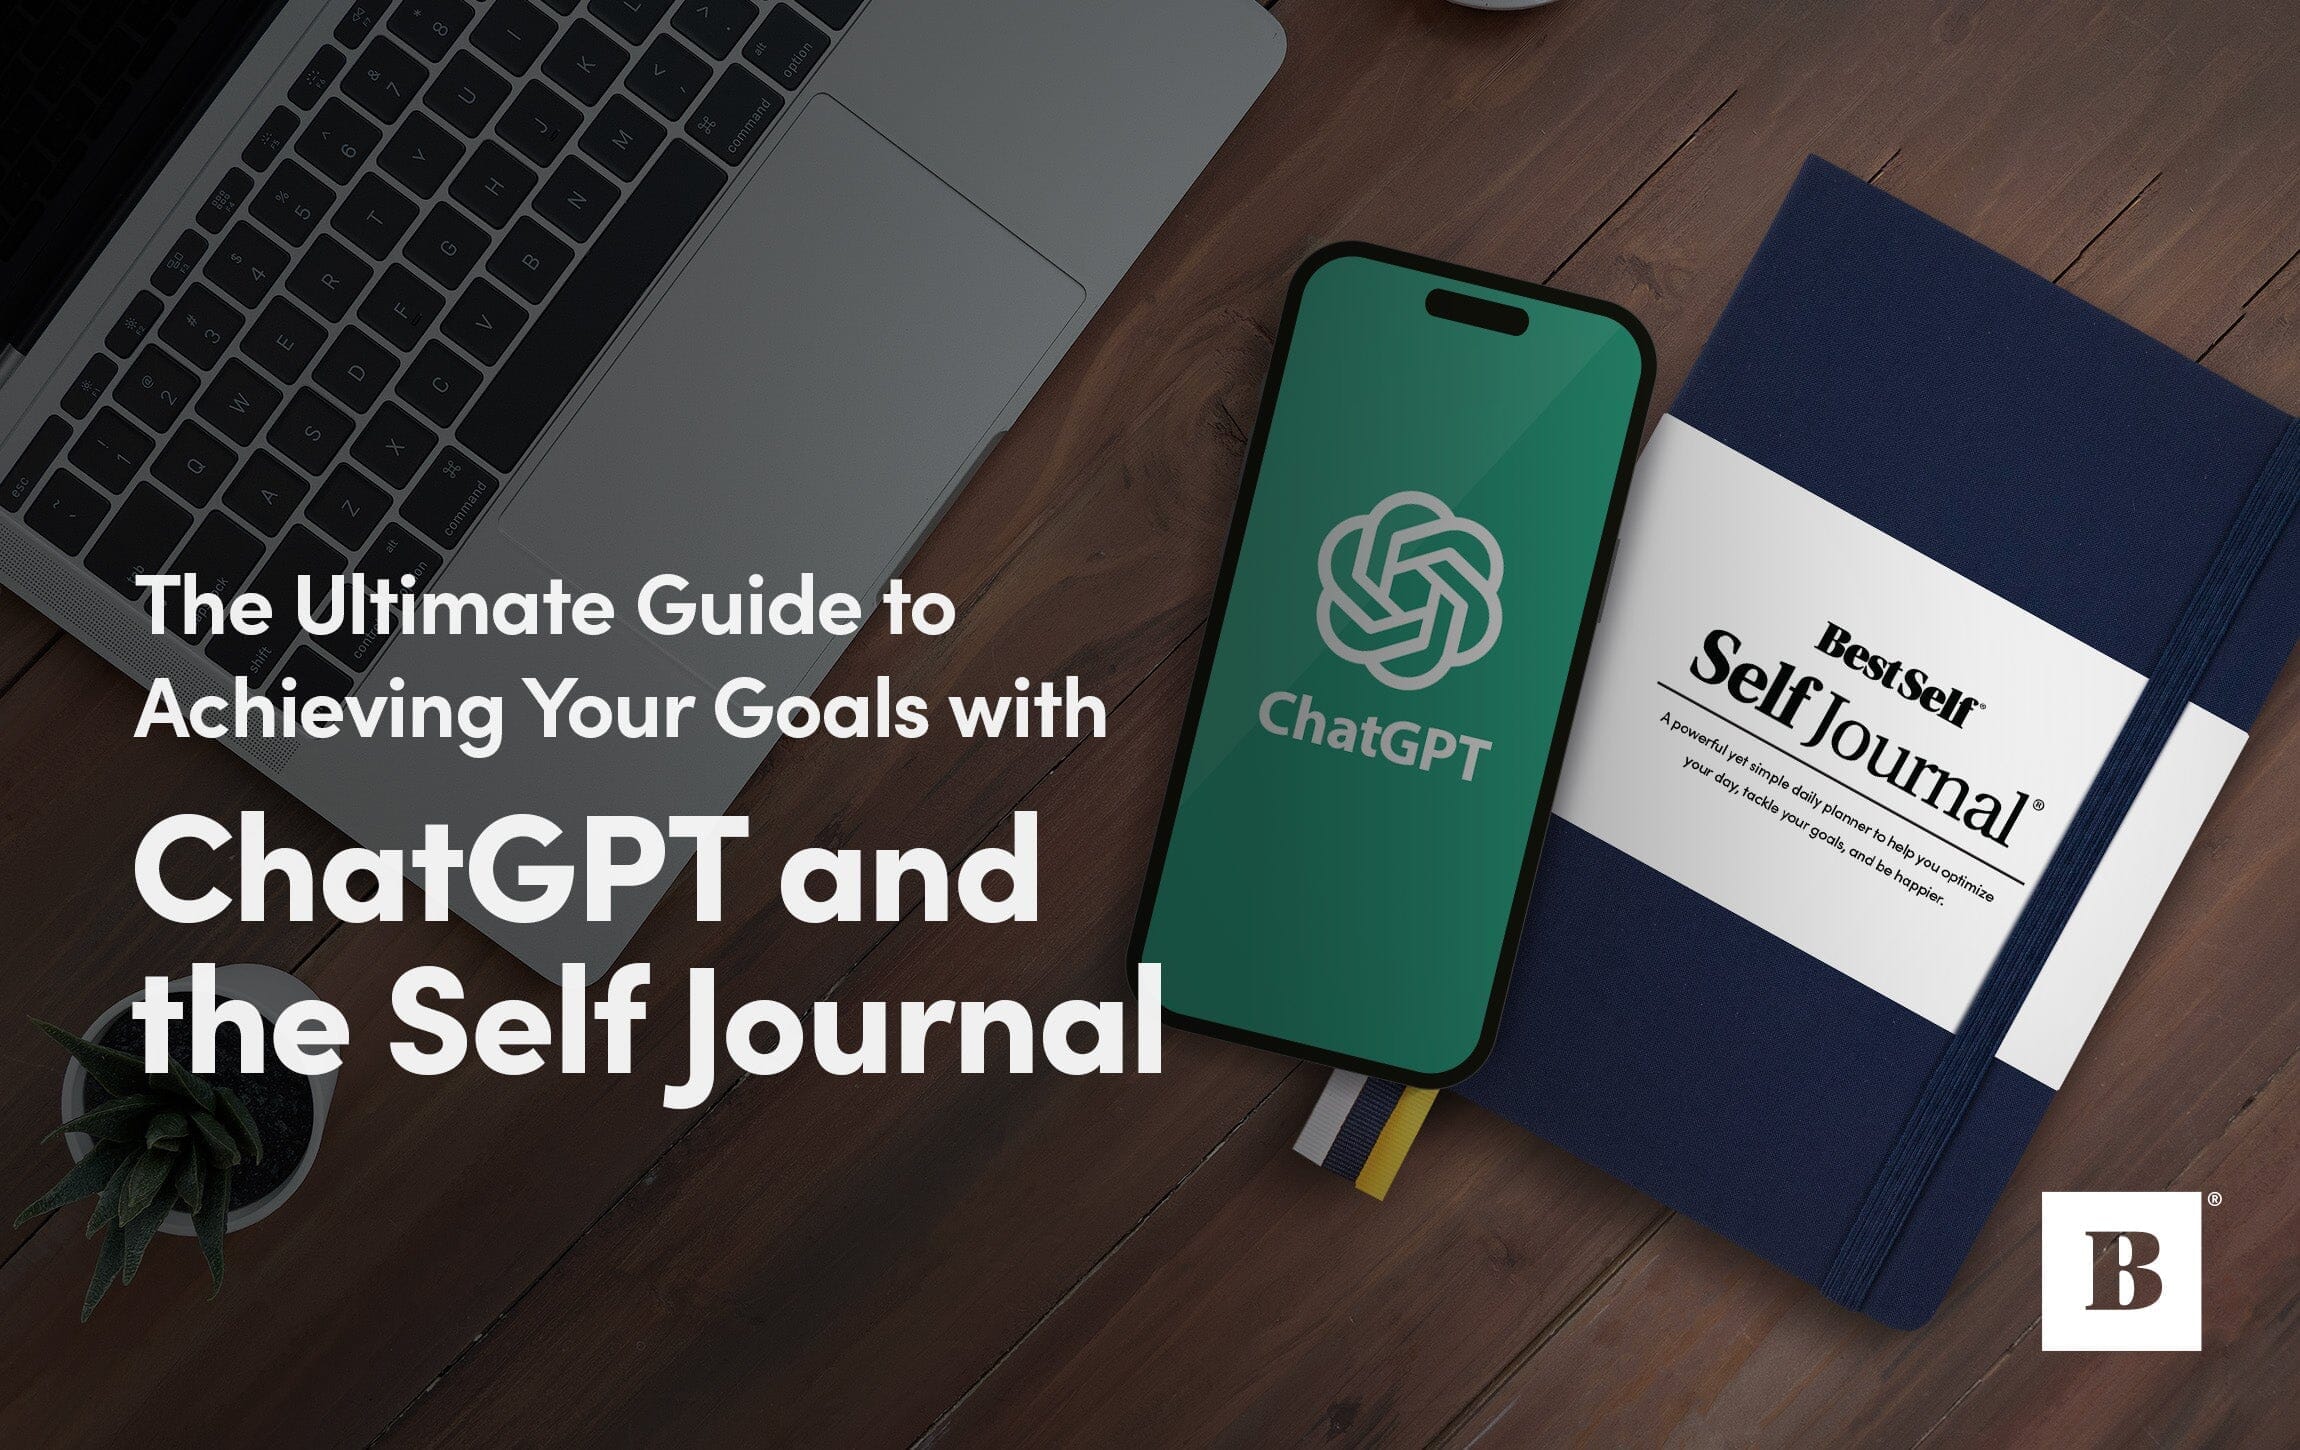 The Ultimate Guide to Achieving Your Goals with ChatGPT and the Self Journal